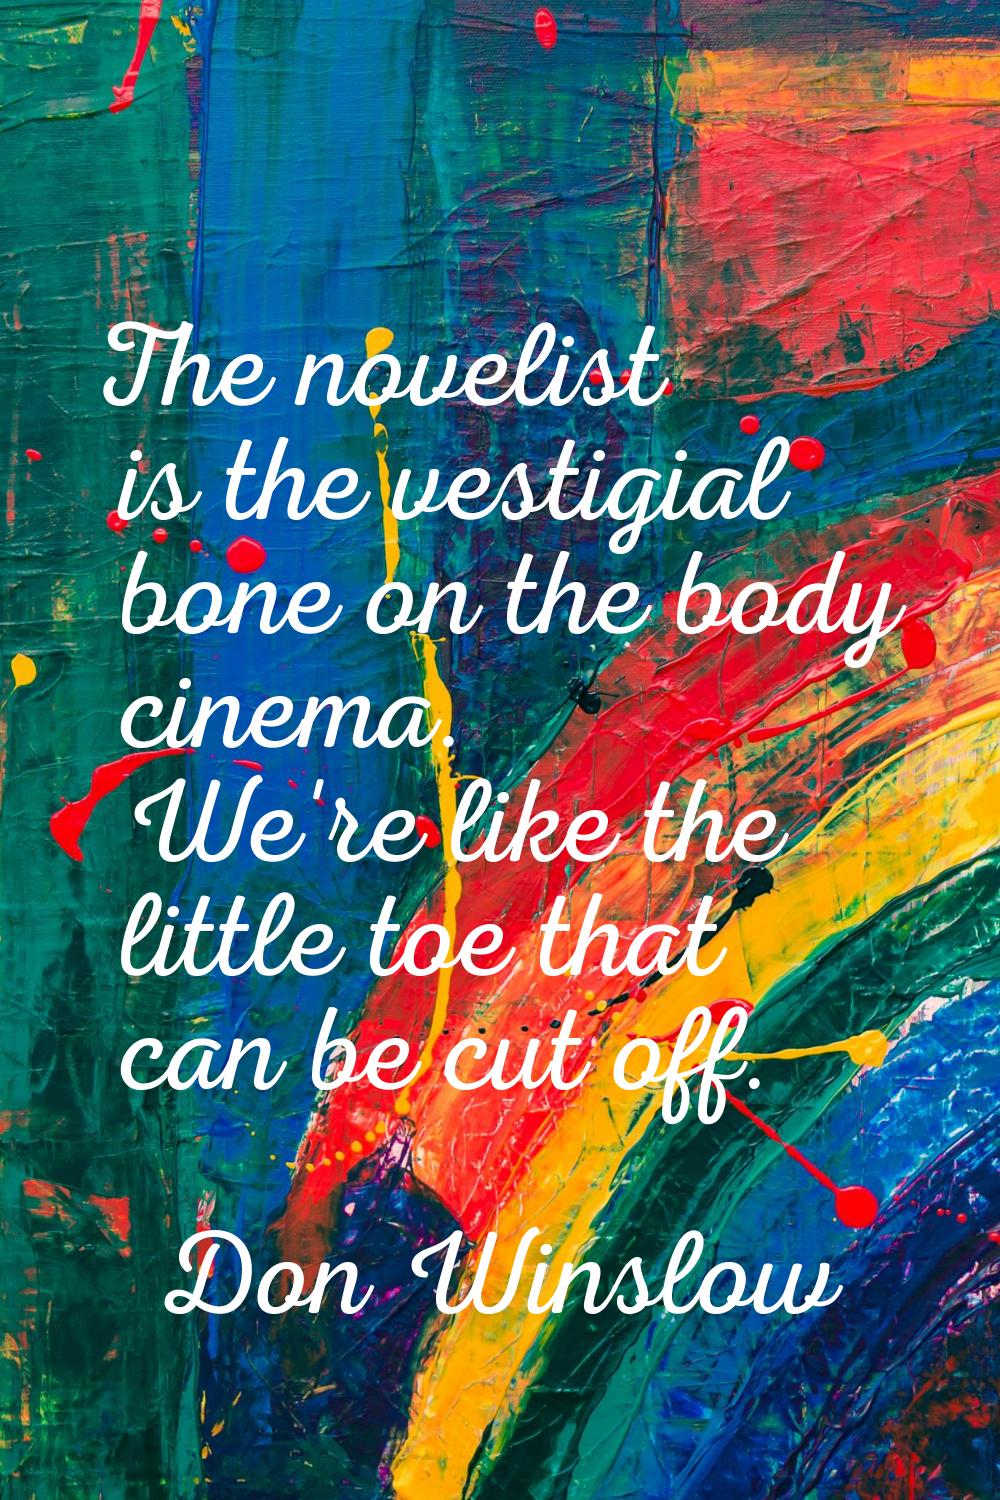 The novelist is the vestigial bone on the body cinema. We're like the little toe that can be cut of